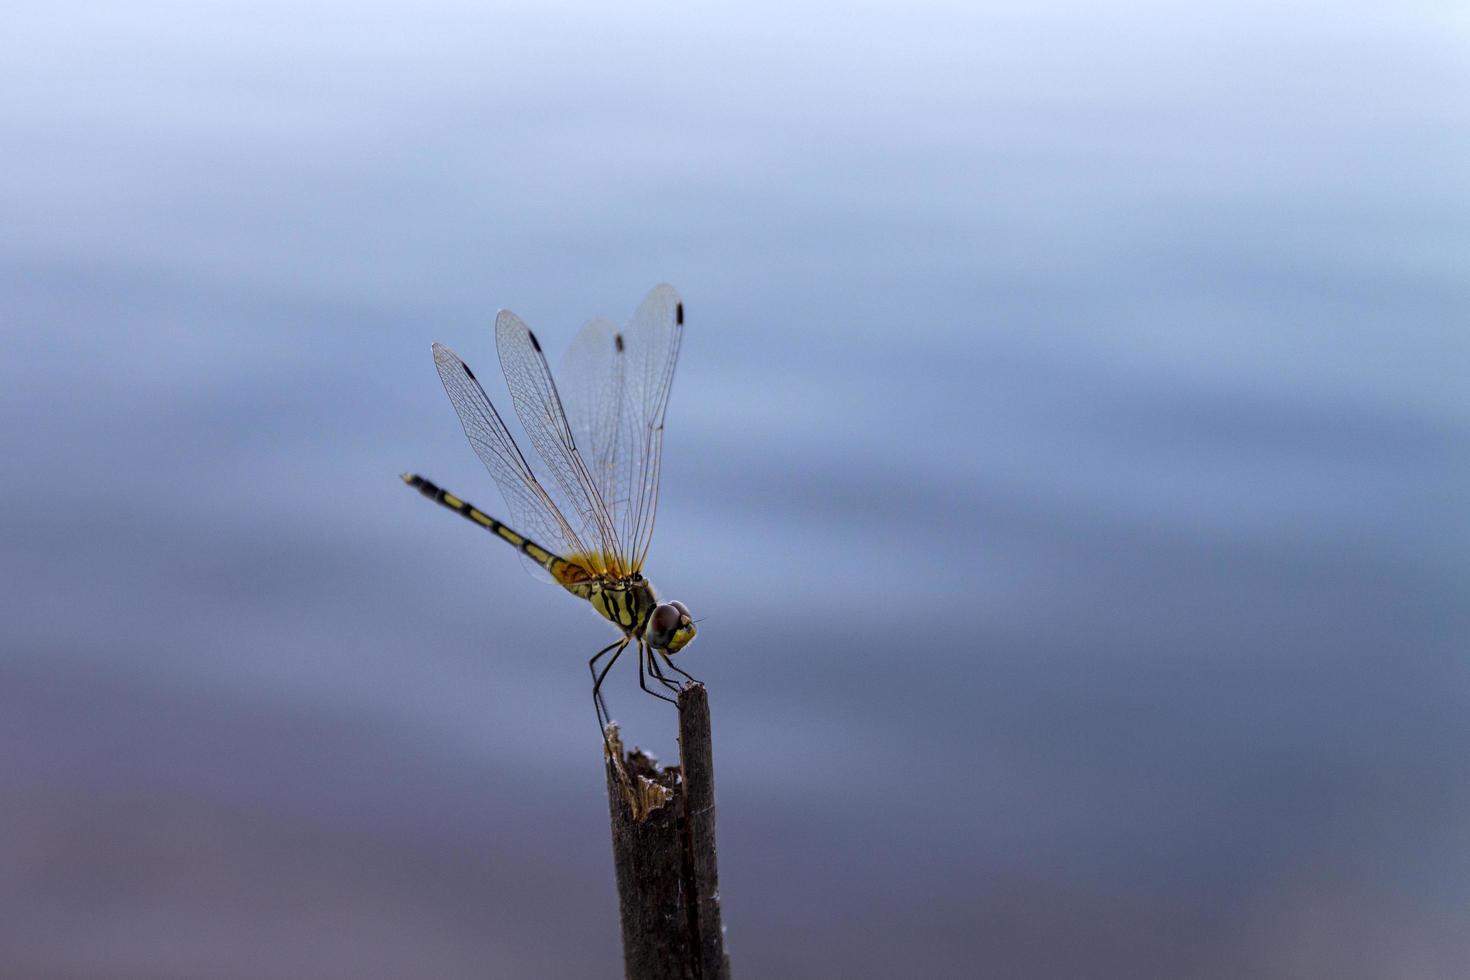 A dragonfly clings to a branch by the river. photo